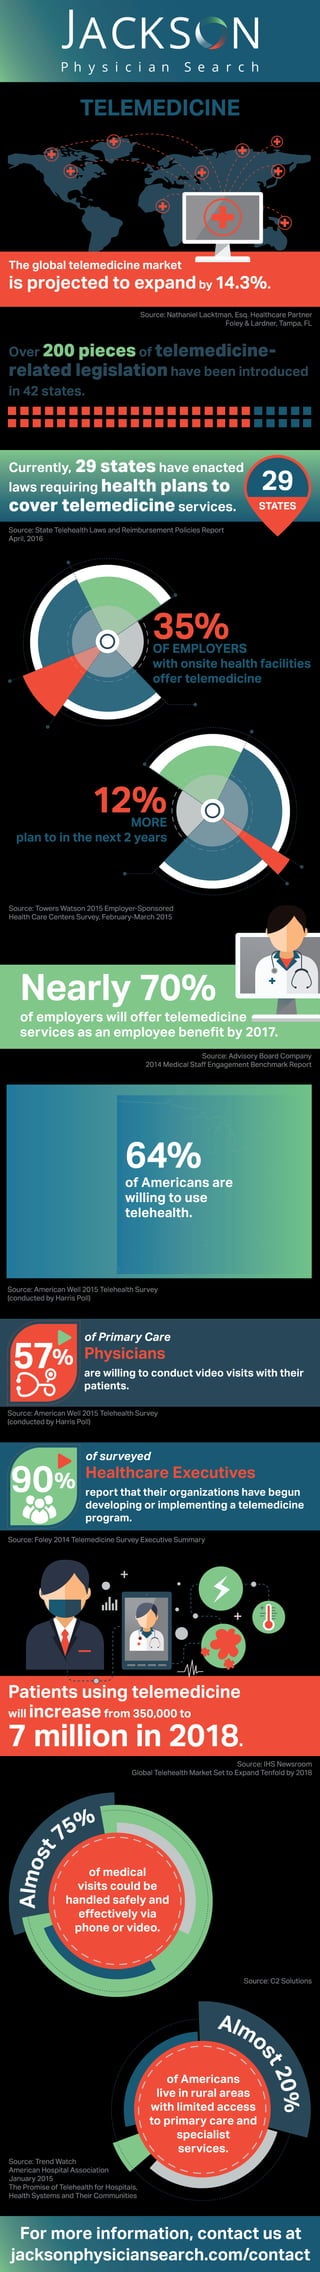 Healthcare Executives
report that their organizations have begun
developing or implementing a telemedicine
program.
of surveyed
Physicians
are willing to conduct video visits with their
patients.
of Primary Care
57%
90%
Source: Foley 2014 Telemedicine Survey Executive Summary
Source: American Well 2015 Telehealth Survey
(conducted by Harris Poll)
Source: Towers Watson 2015 Employer-Sponsored
Health Care Centers Survey, February-March 2015
35%35%OF EMPLOYERS
with onsite health facilities
oﬀer telemedicine
12%12%MORE
plan to in the next 2 years
Nearly 70%
of employers will oﬀer telemedicine
services as an employee beneﬁt by 2017.
Source: Advisory Board Company
2014 Medical Staﬀ Engagement Benchmark Report
For more information, contact us at
jacksonphysiciansearch.com/contact
64%64%
of Americans are
willing to use
telehealth.
Source: American Well 2015 Telehealth Survey
(conducted by Harris Poll)
Patients using telemedicine
will increasefrom 350,000 to
7 million in 2018.
Source: IHS Newsroom
Global Telehealth Market Set to Expand Tenfold by 2018
Source: C2 Solutions
Source: Nathaniel Lacktman, Esq. Healthcare Partner
Foley & Lardner, Tampa, FL
The global telemedicine market
is projected to expandby 14.3%.
TELEMEDICINE
Over 200 pieces of telemedicine-
related legislation have been introduced
in 42 states.
Currently, 29 states have enacted
laws requiring health plans to
cover telemedicine services.
29
STATES
29
STATES
Source: State Telehealth Laws and Reimbursement Policies Report
April, 2016
Almost
75%
of medical
visits could be
handled safely and
eﬀectively via
phone or video.
Almo
st20%
of Americans
live in rural areas
with limited access
to primary care and
specialist
services.
Source: Trend Watch
American Hospital Association
January 2015
The Promise of Telehealth for Hospitals,
Health Systems and Their Communities
 